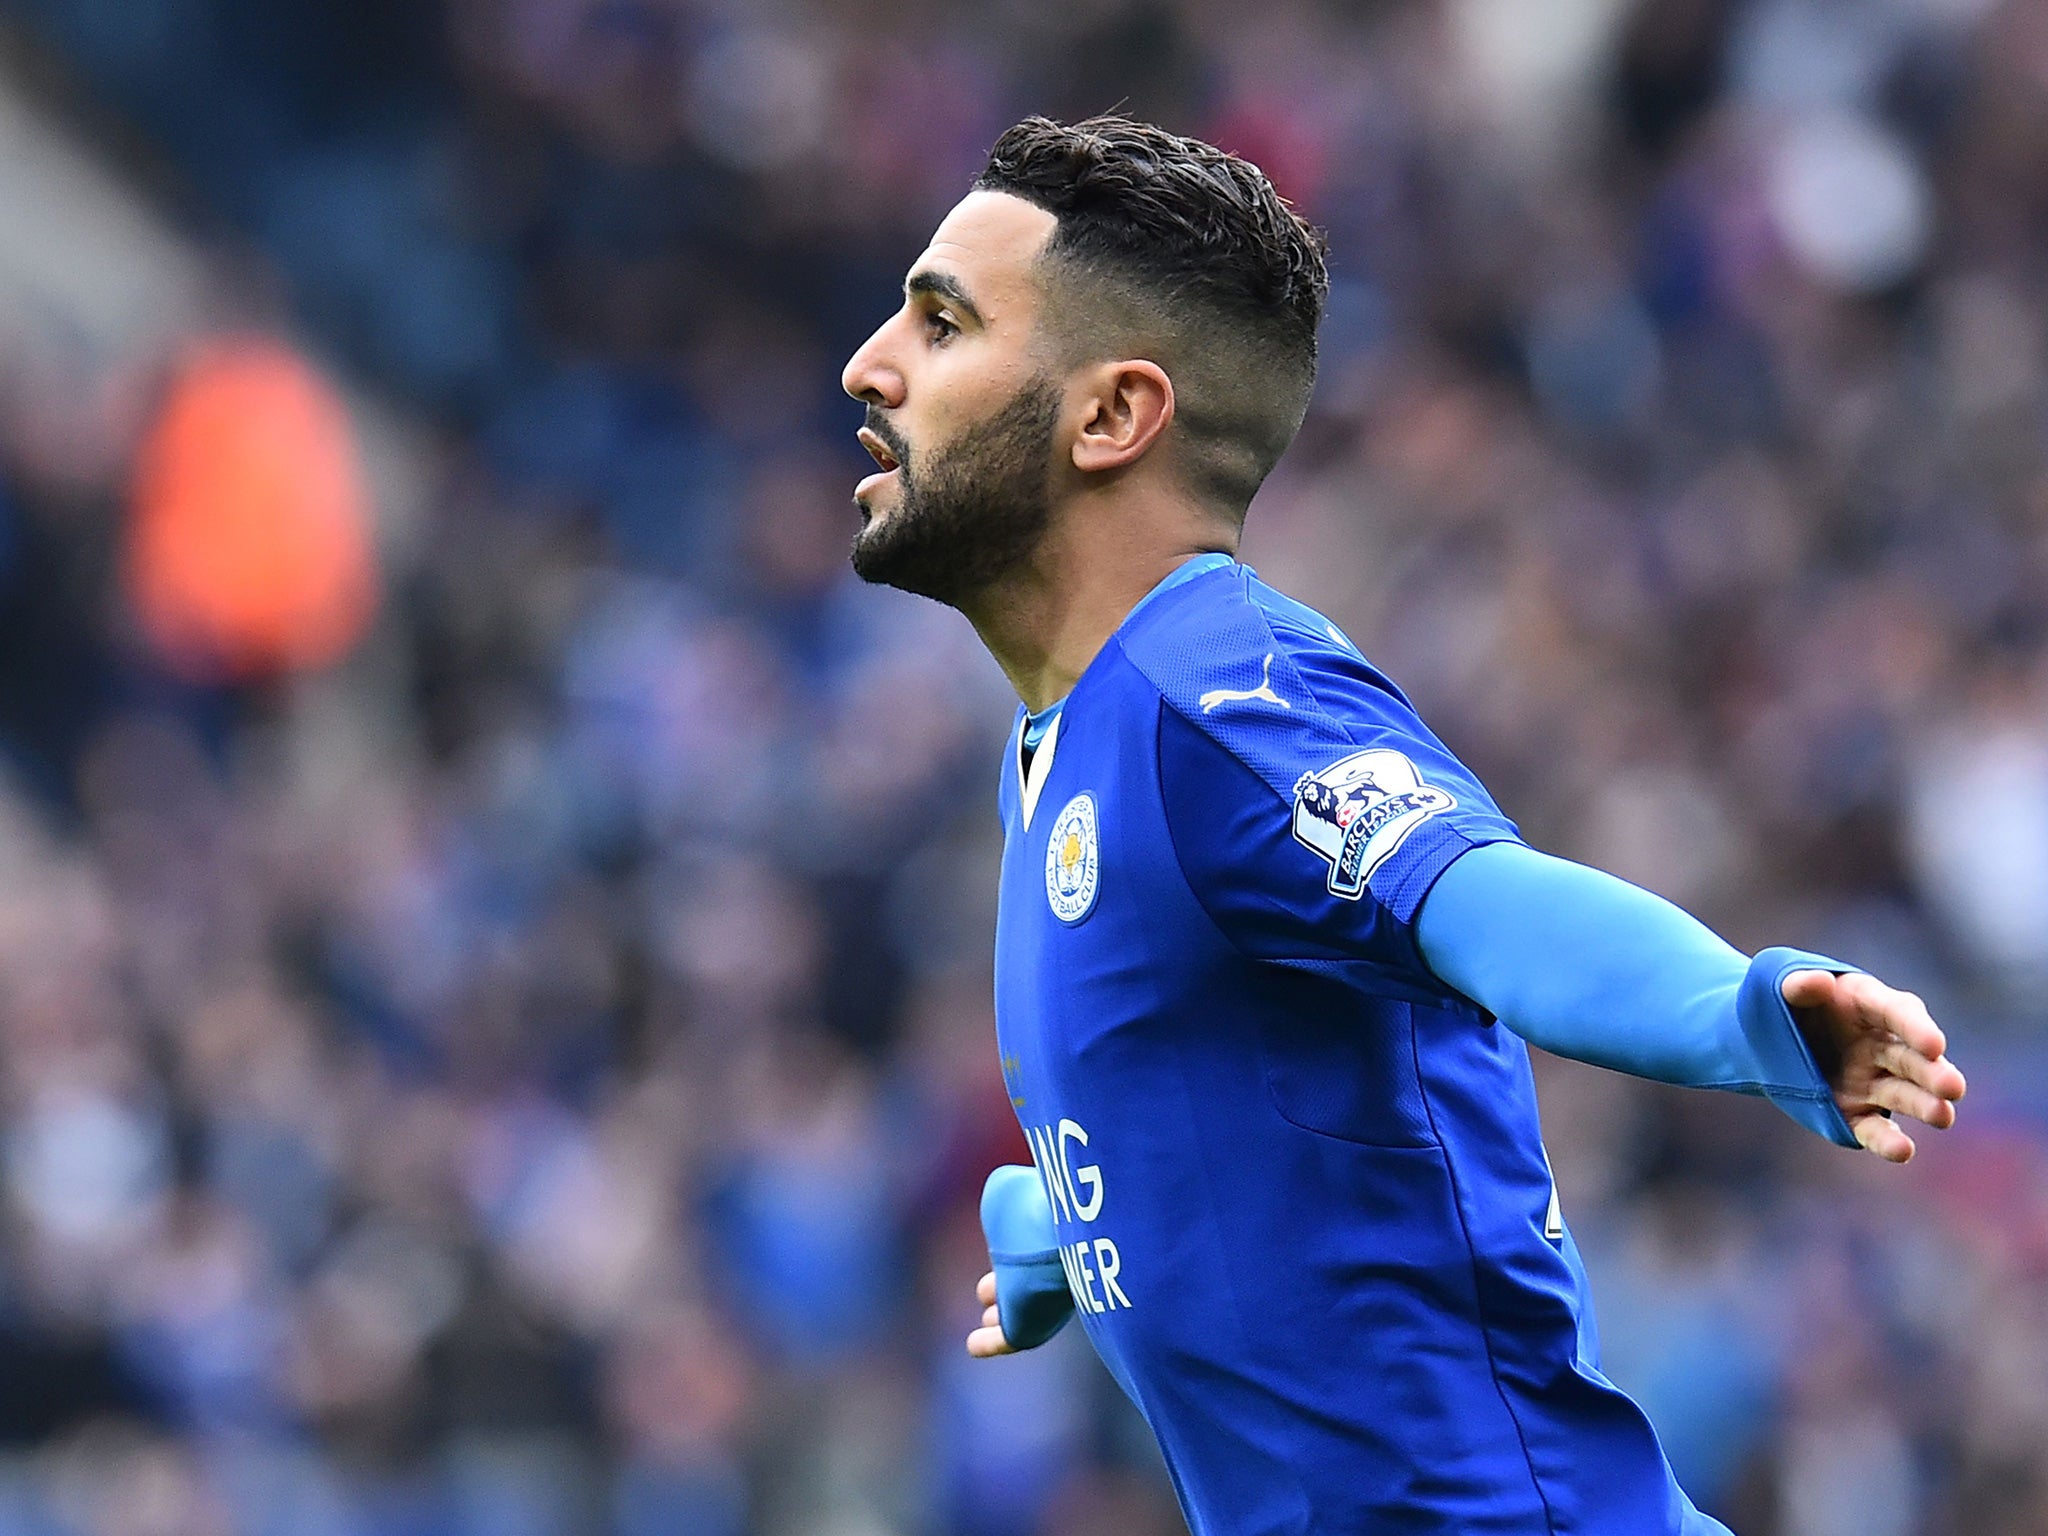 Riyad Mahrez has been in phenomenal form for Leicester this season